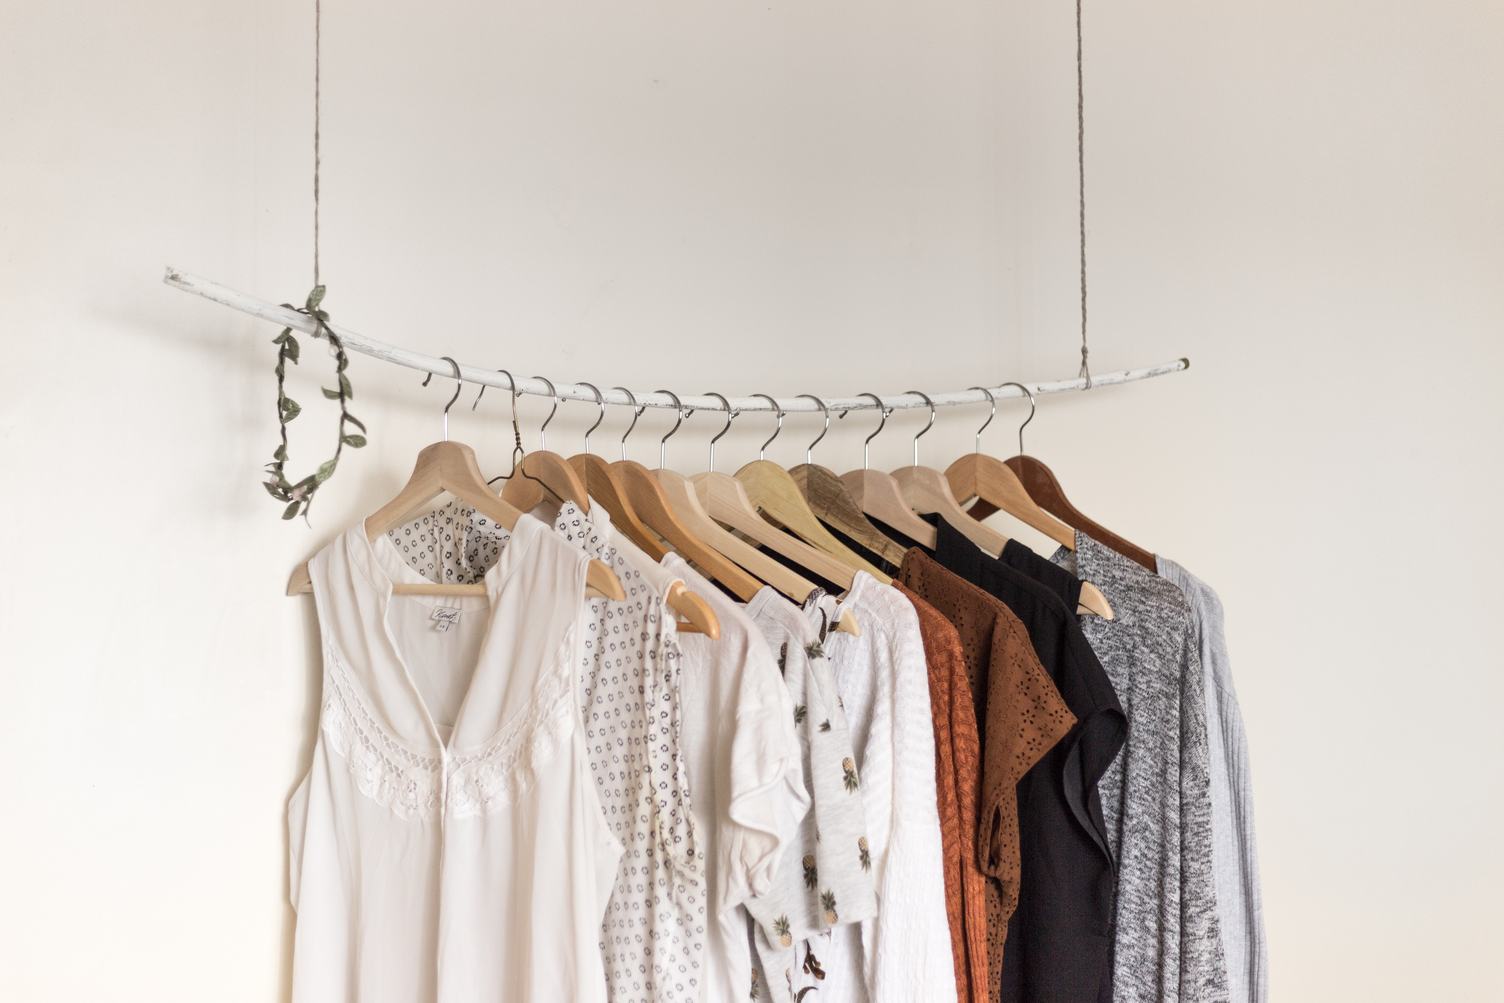 Variety of Casual Female Clothing on Hangers